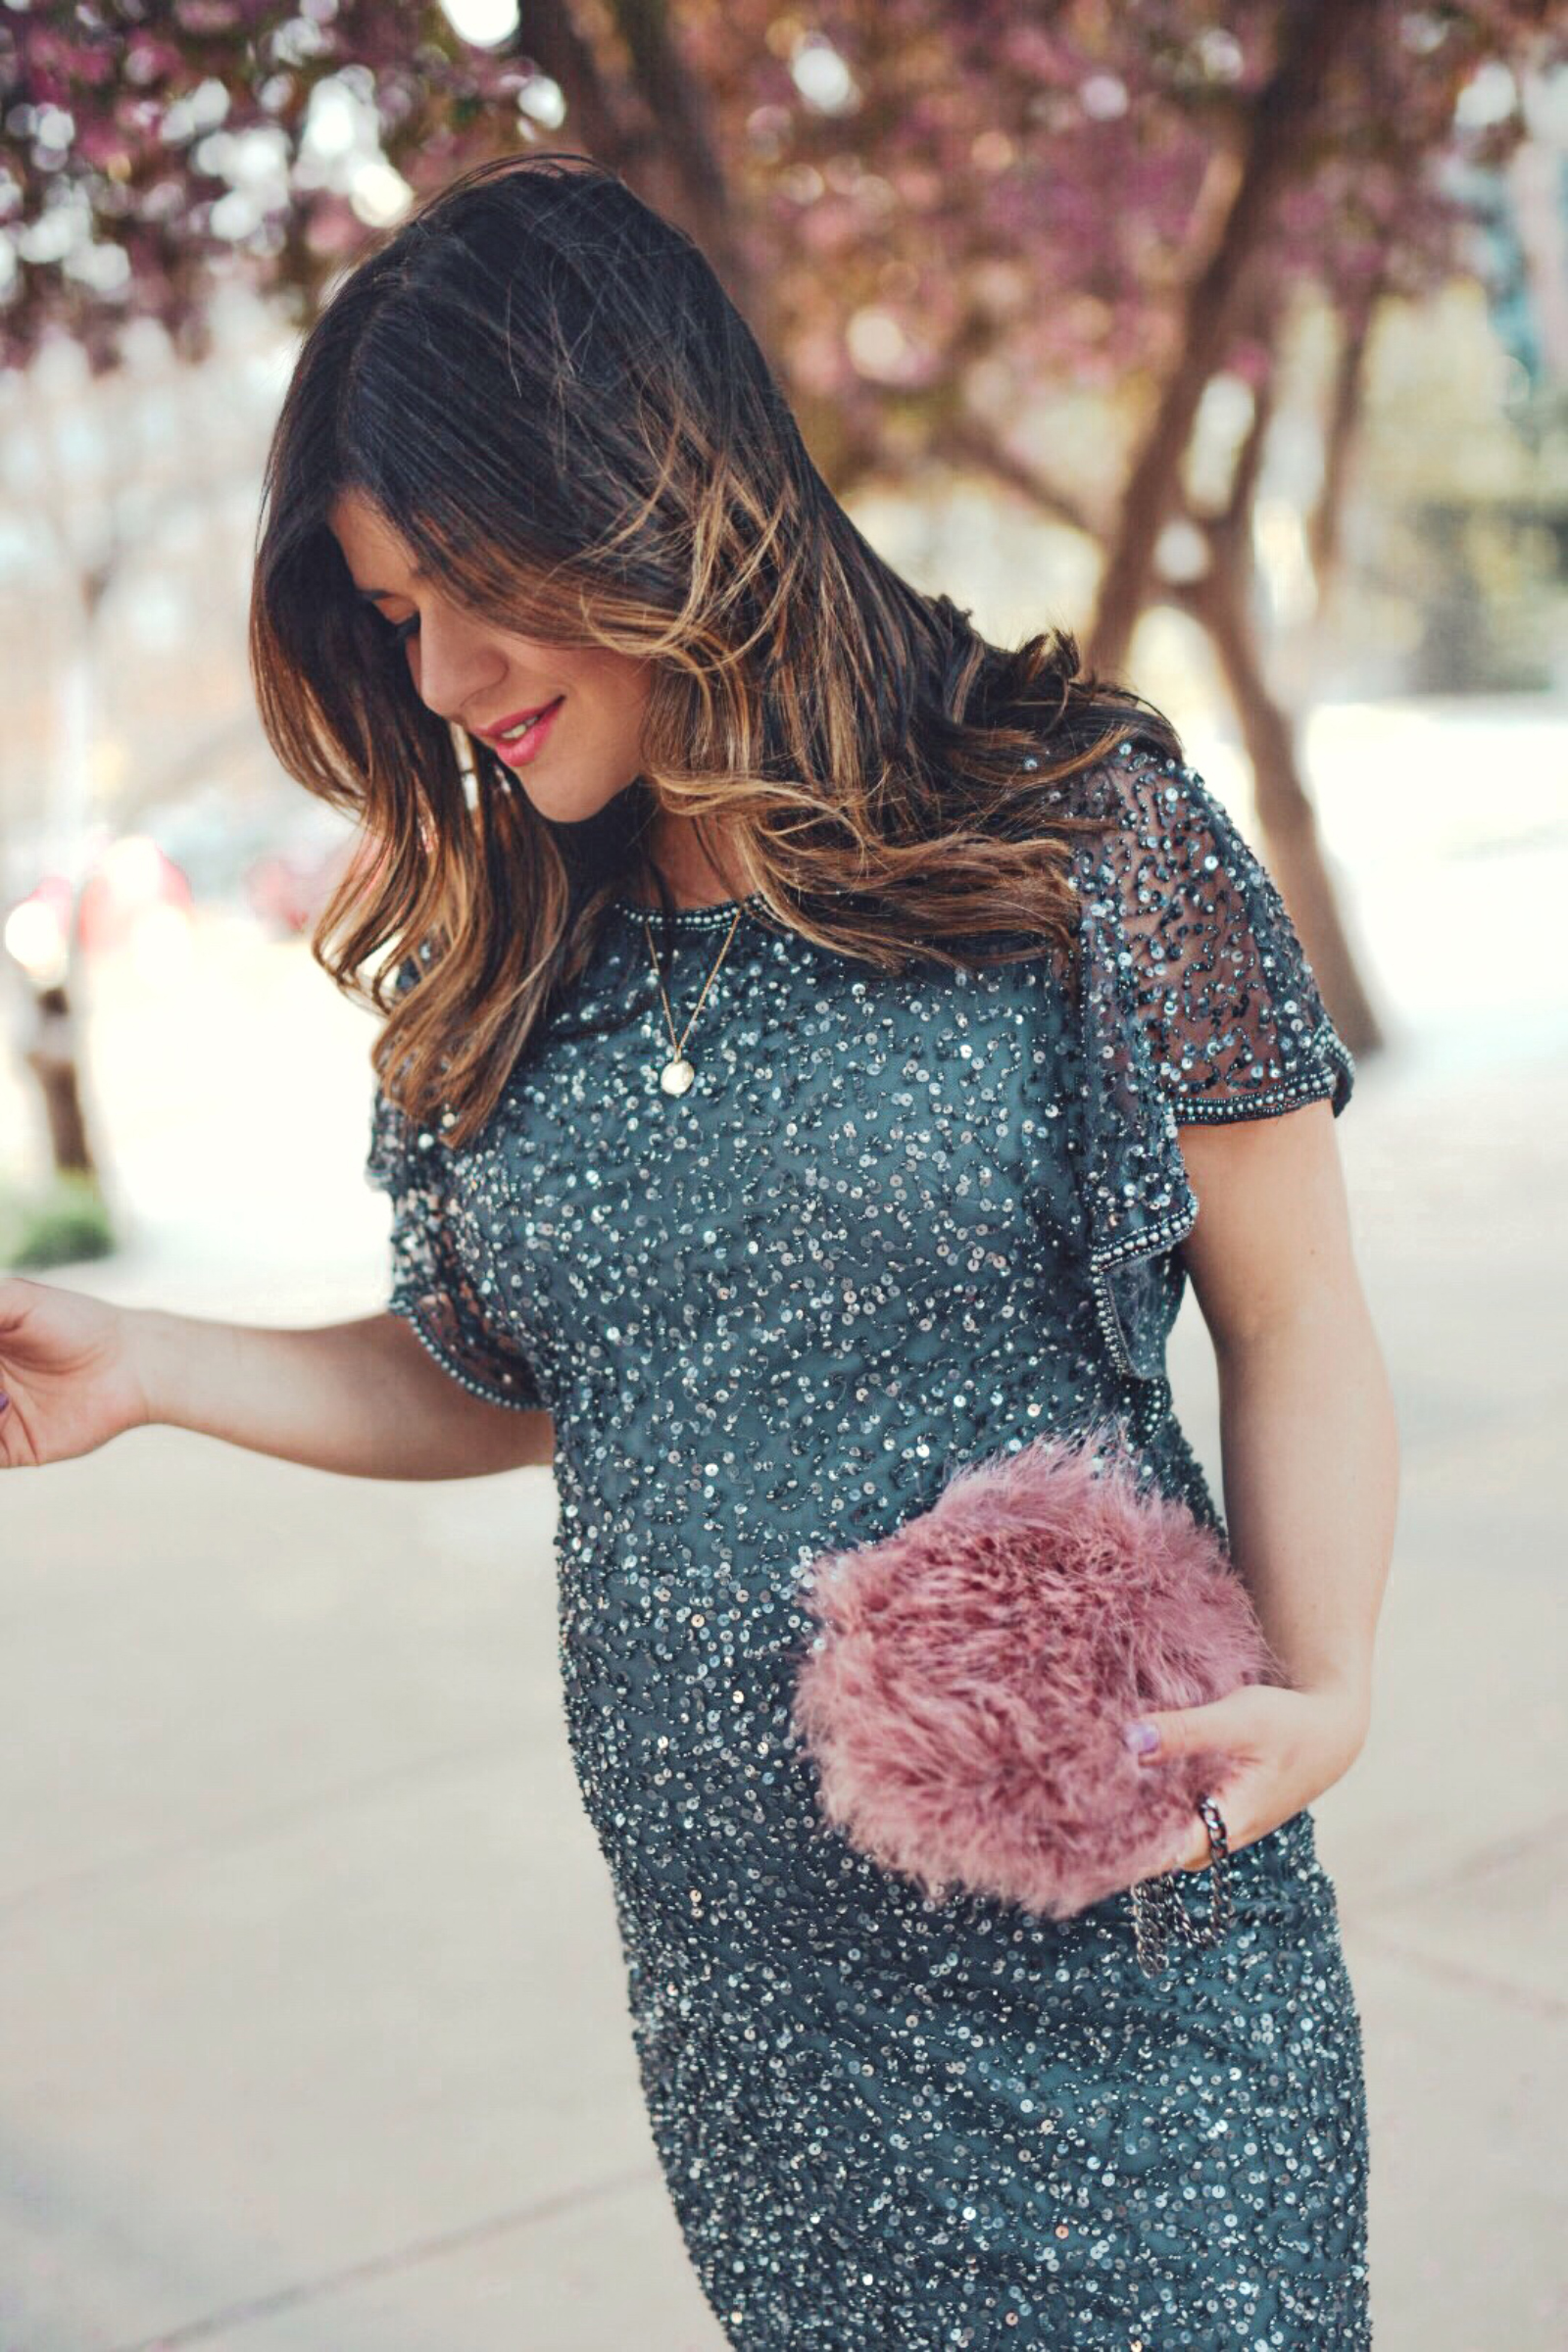 Carolina Hellal of Chic Talk wearing an Adrianna Papell beaded cocktail dress, Nine west grey shoes and topshop feather bag - ADRIANNA PAPELL DRESS styled by popular Denver fashion blogger, Chic Talk